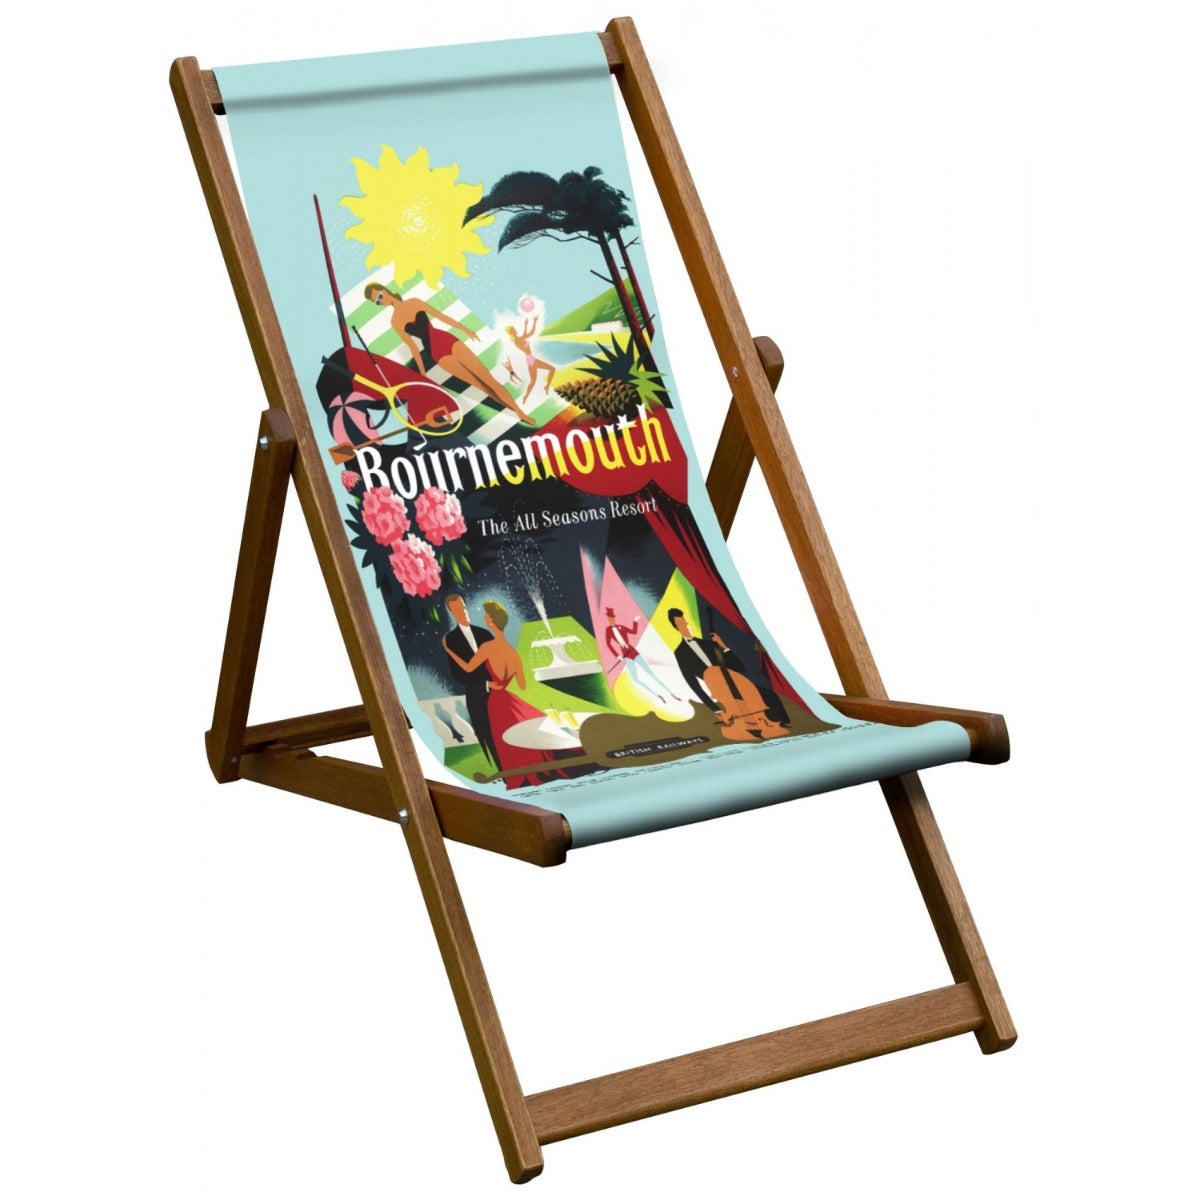 Vintage Inspired Wooden Deckchair- Bournemouth- National Railway Museum Poster